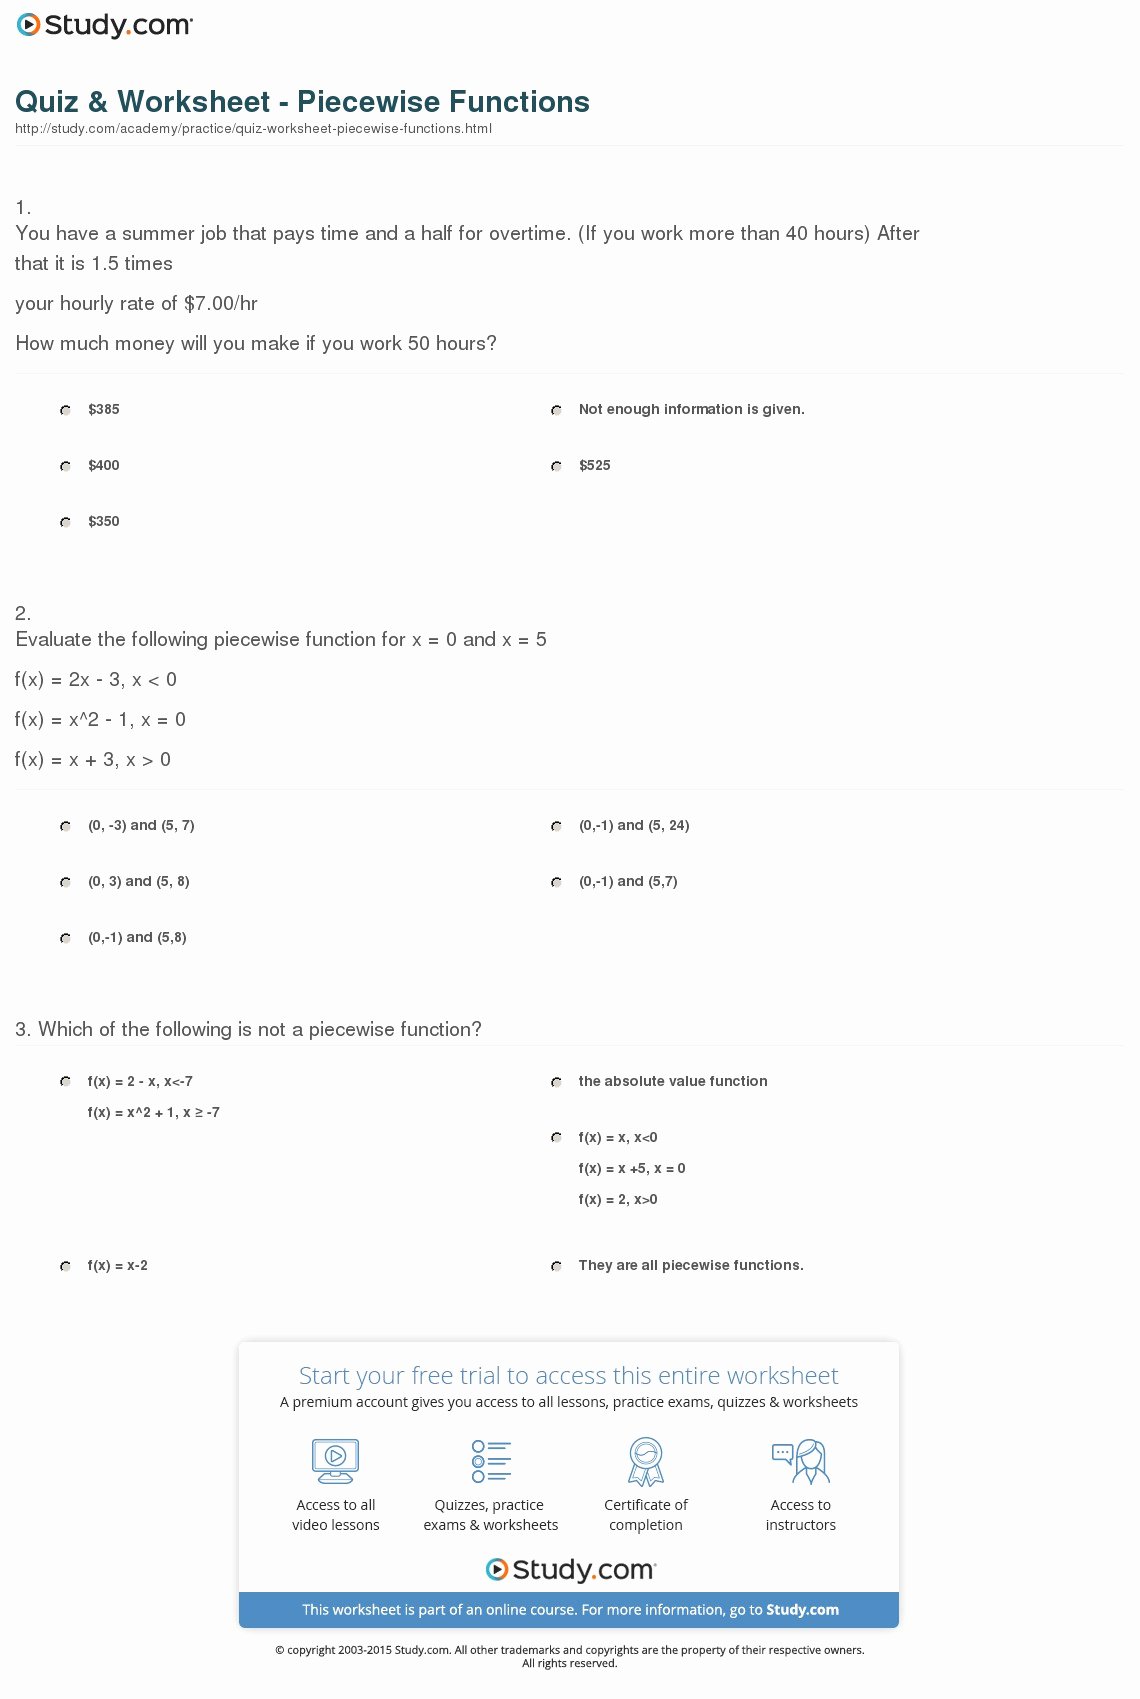 Worksheet Piecewise Functions Answer Key Luxury Quiz &amp; Worksheet Piecewise Functions